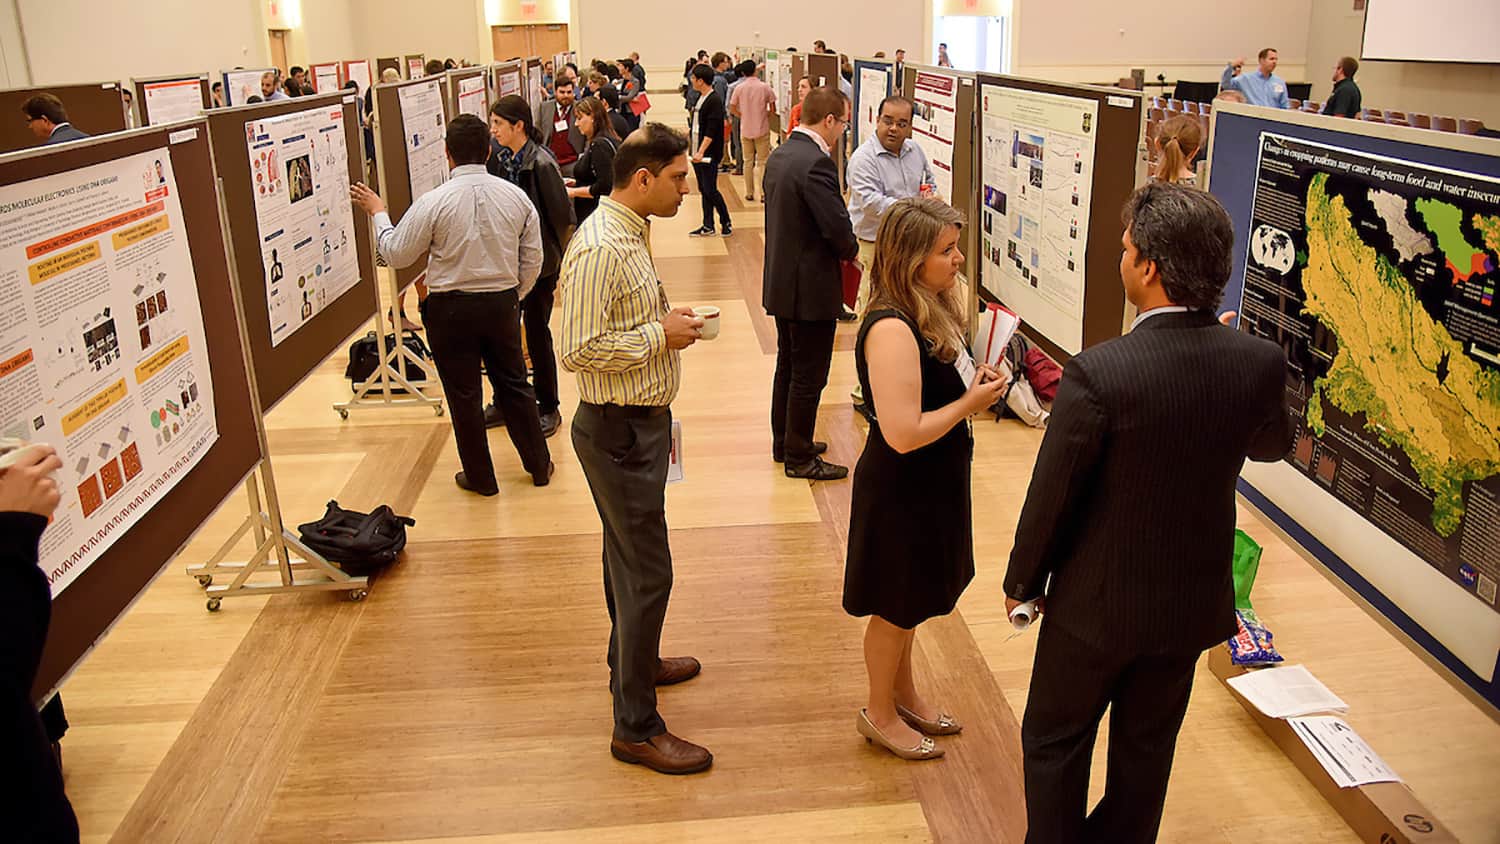 Students and attendees at a research symposium on campus